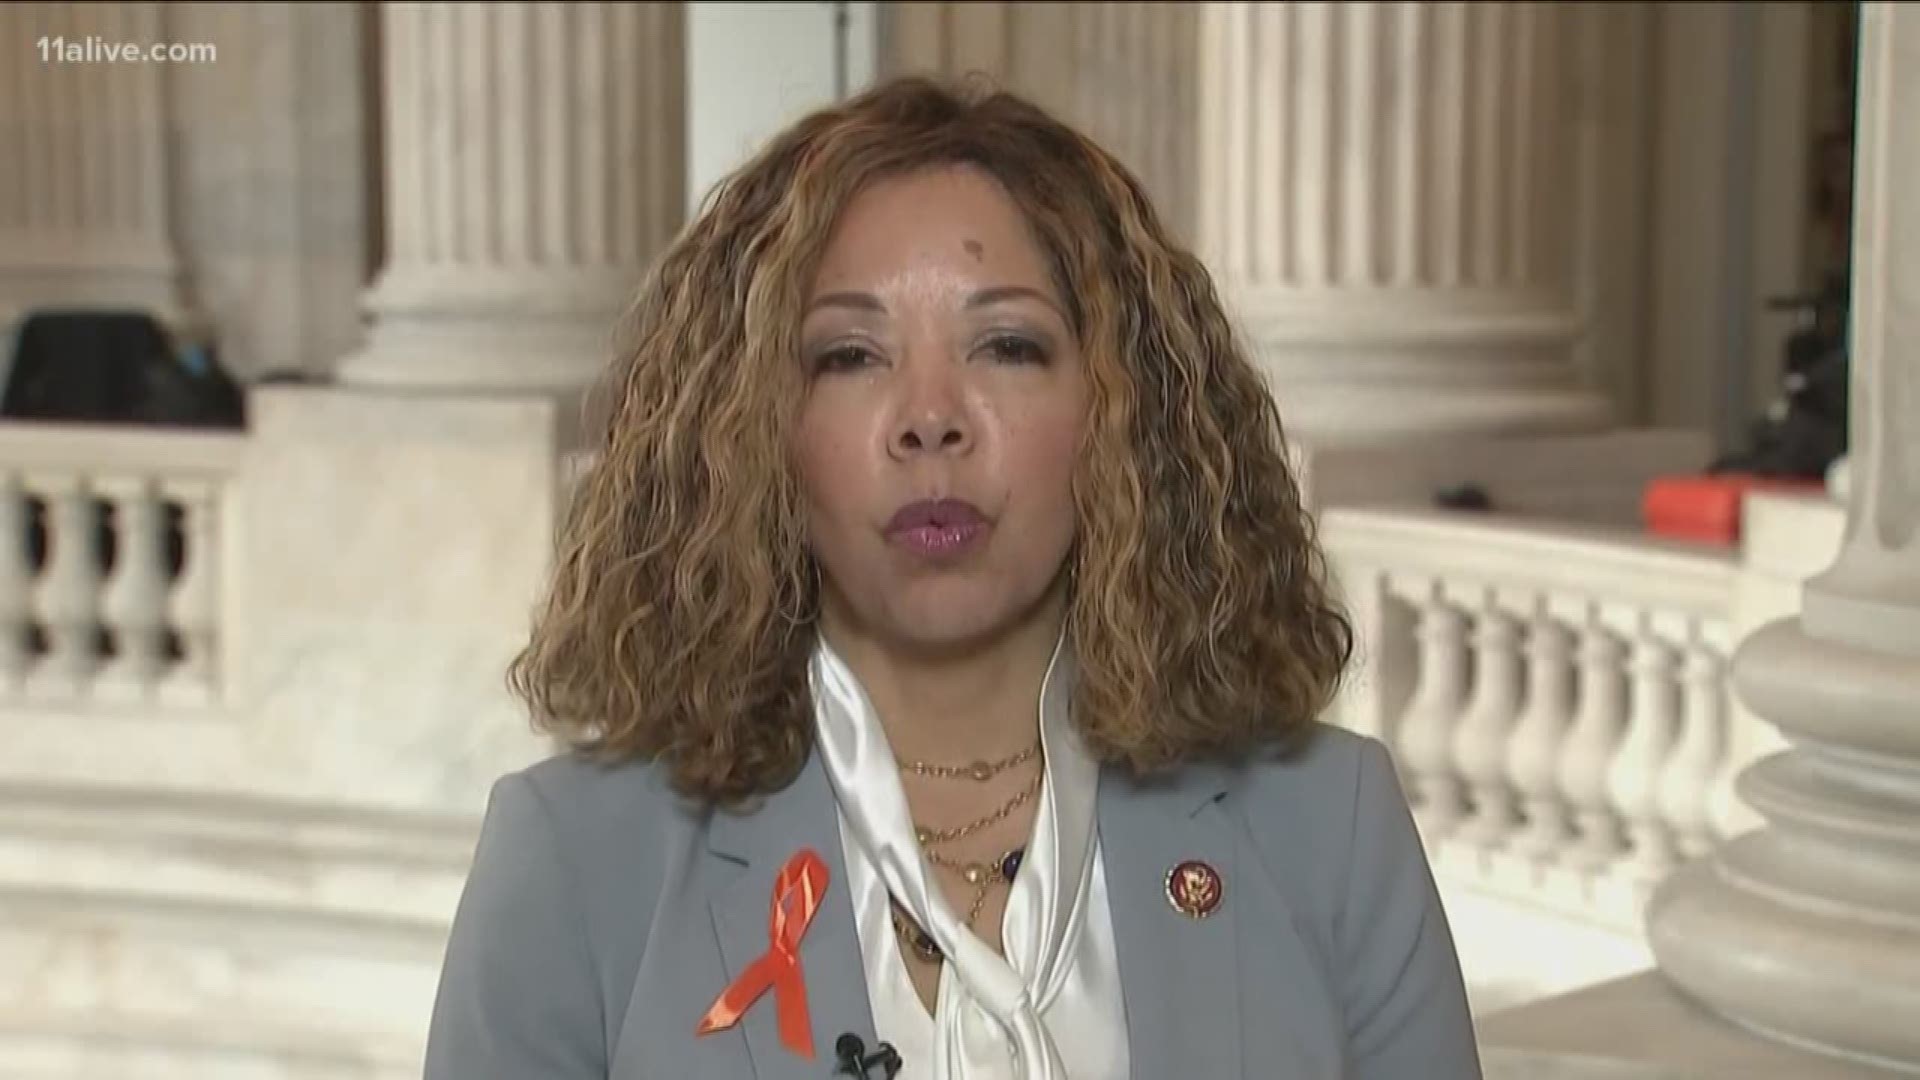 Georgia’s newest member of Congress, Lucy McBath, says she's optimistic Congress will enact a law requiring more background checks for gun buyers.